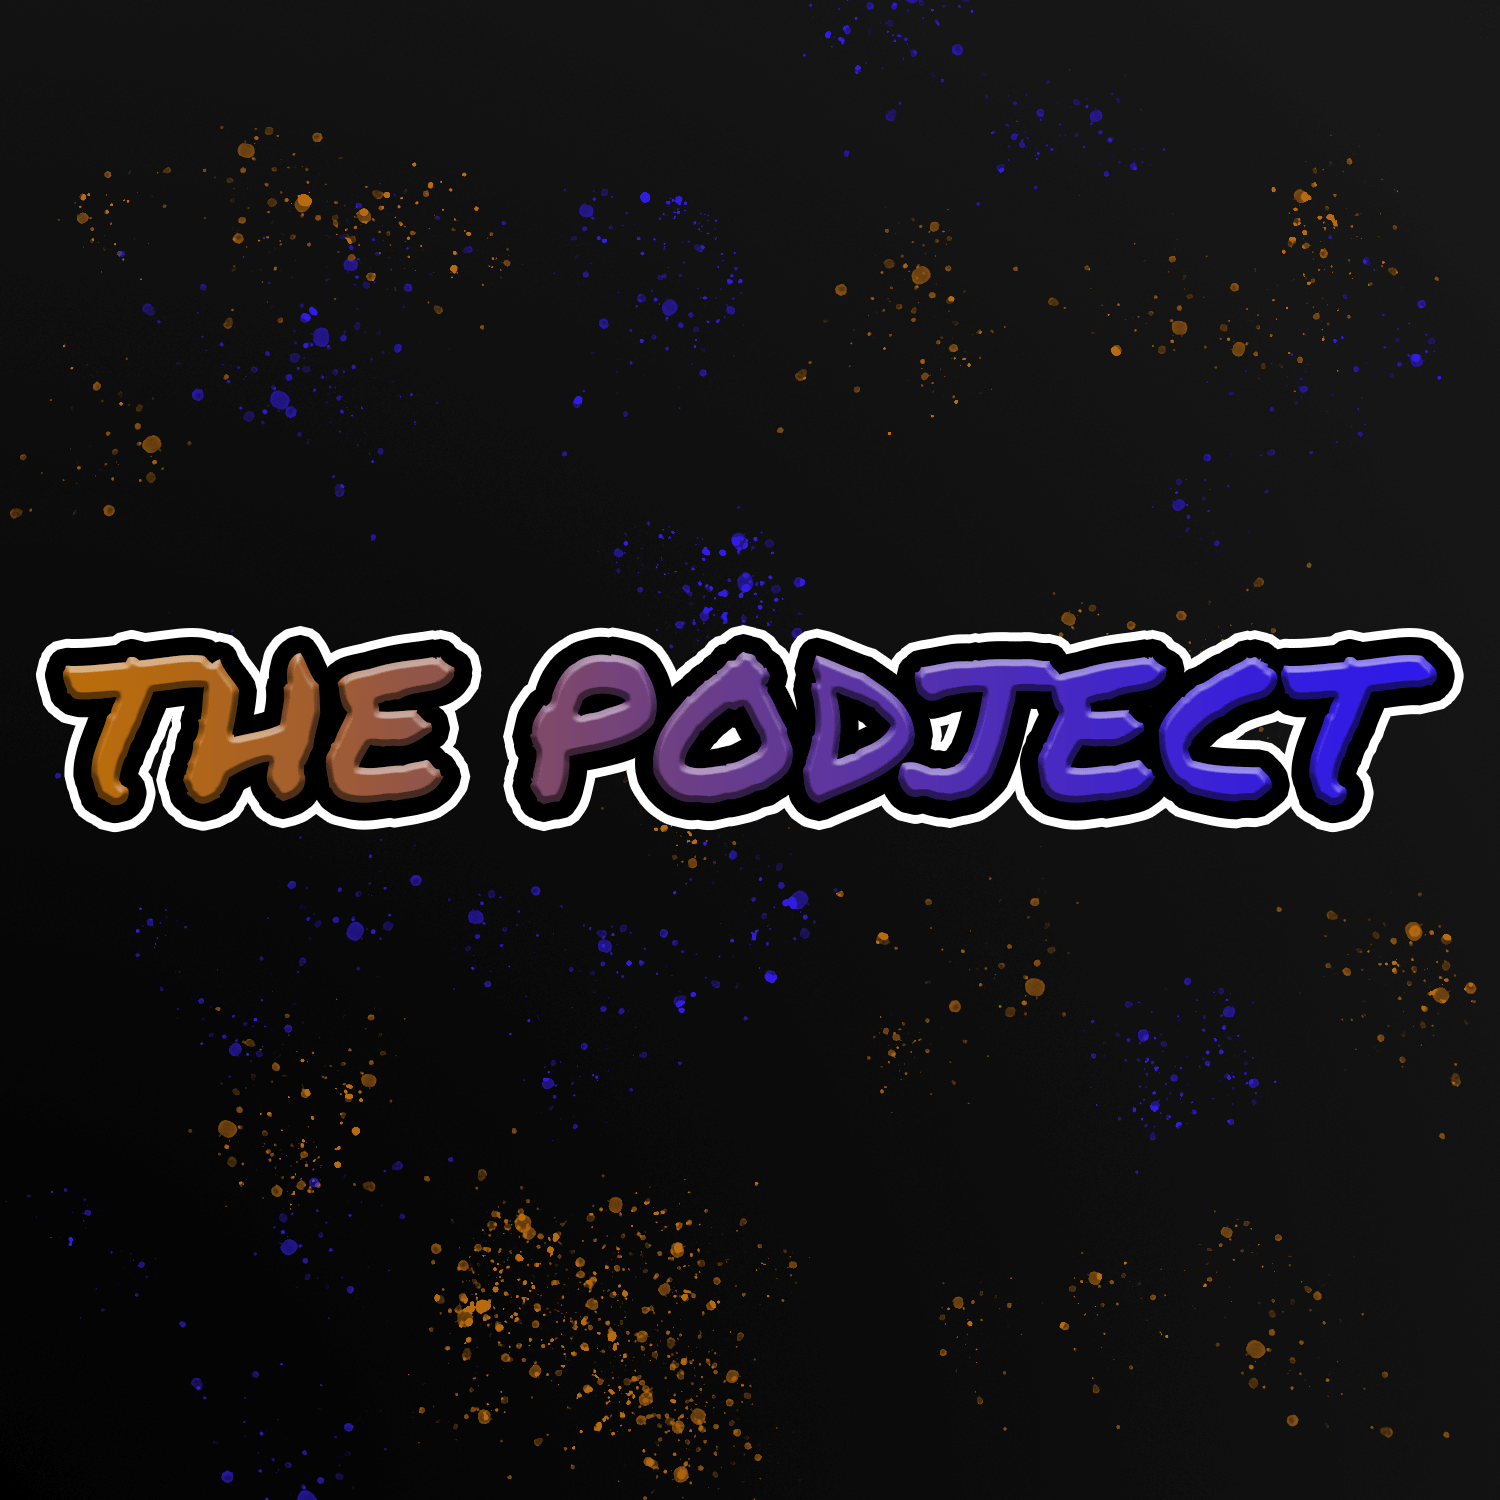 The Podject